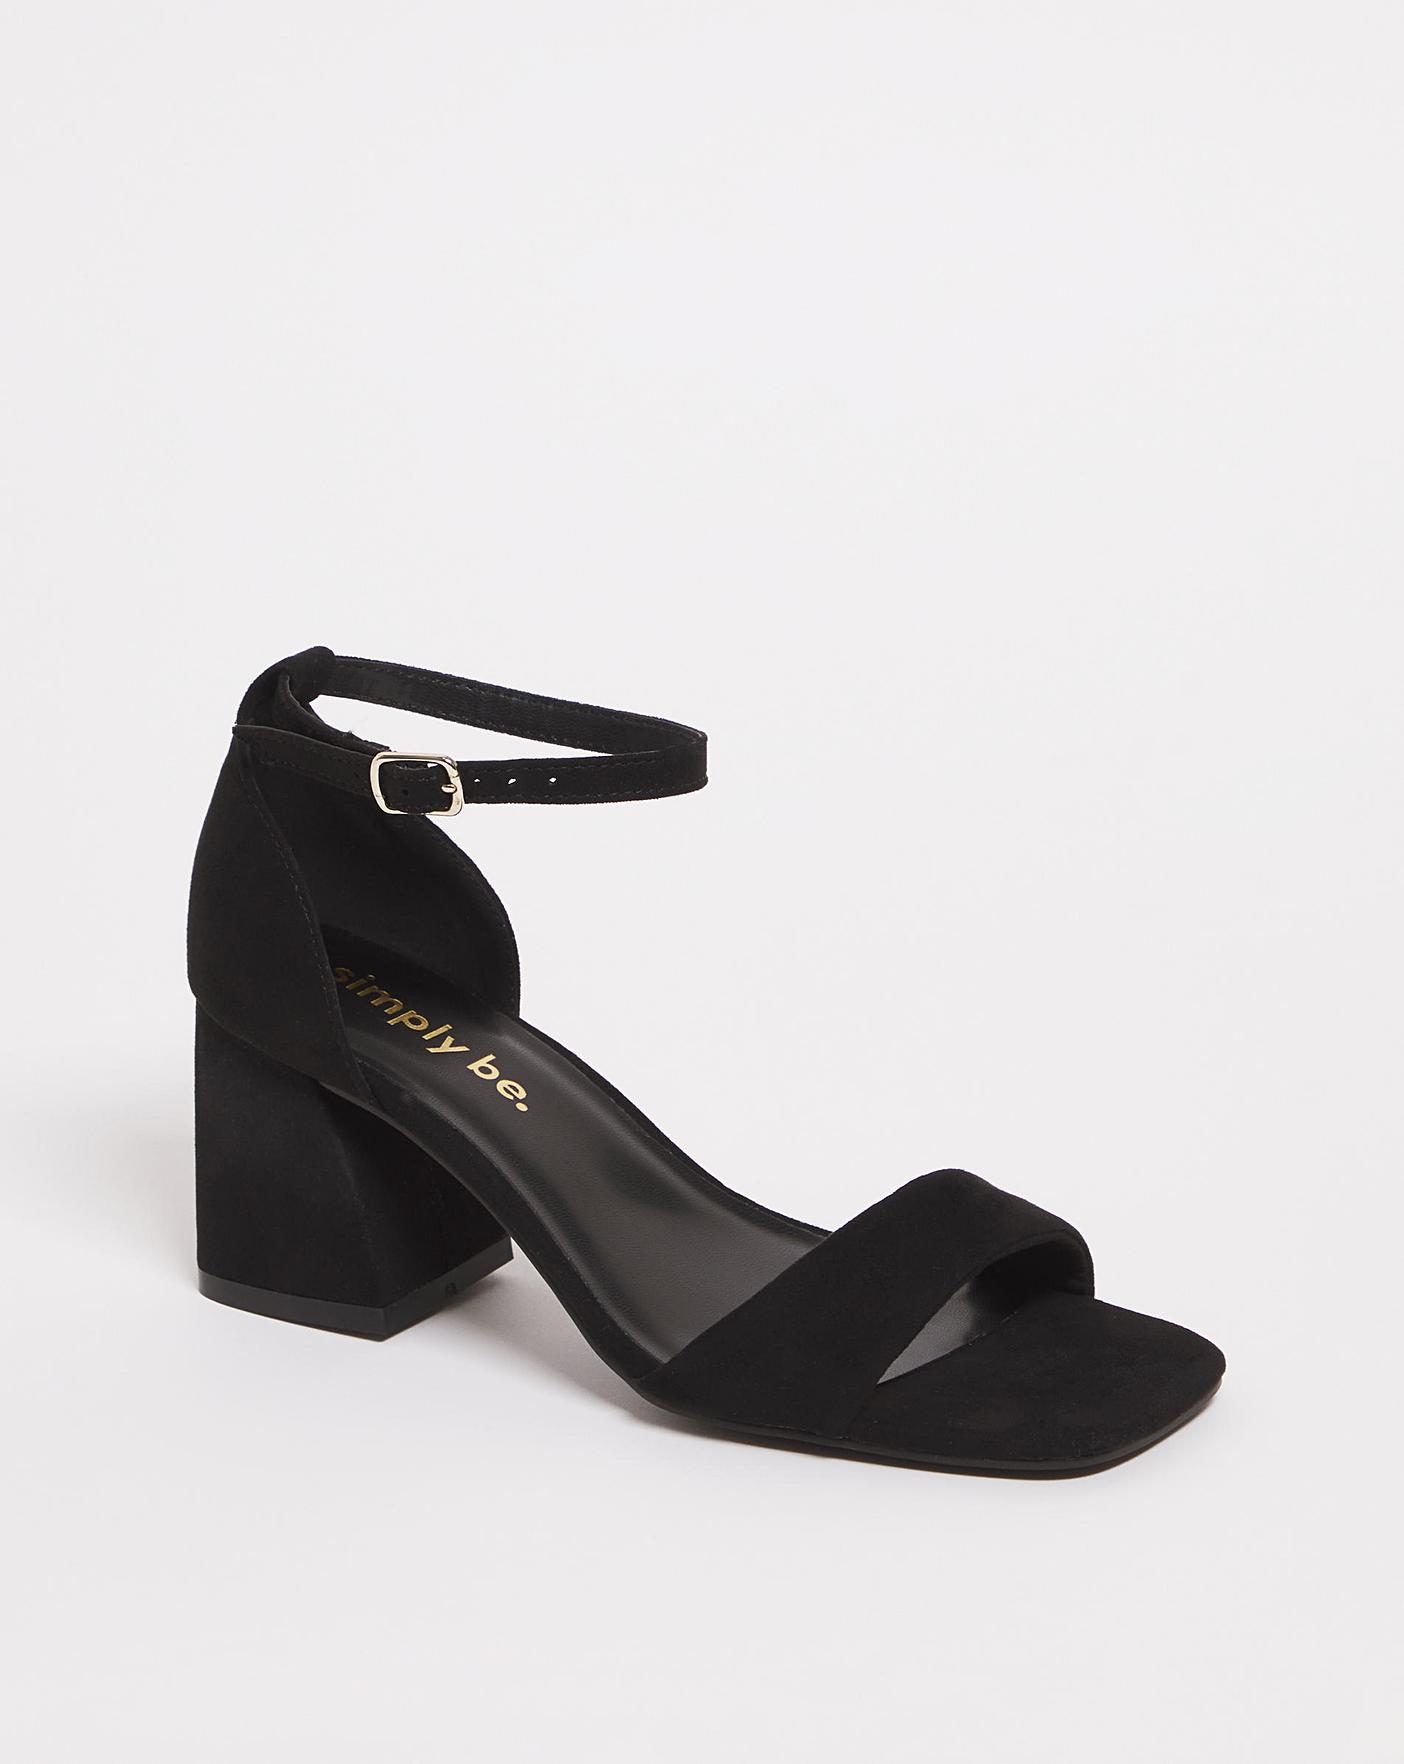 Barely There Heeled Sandals Wide | J D Williams